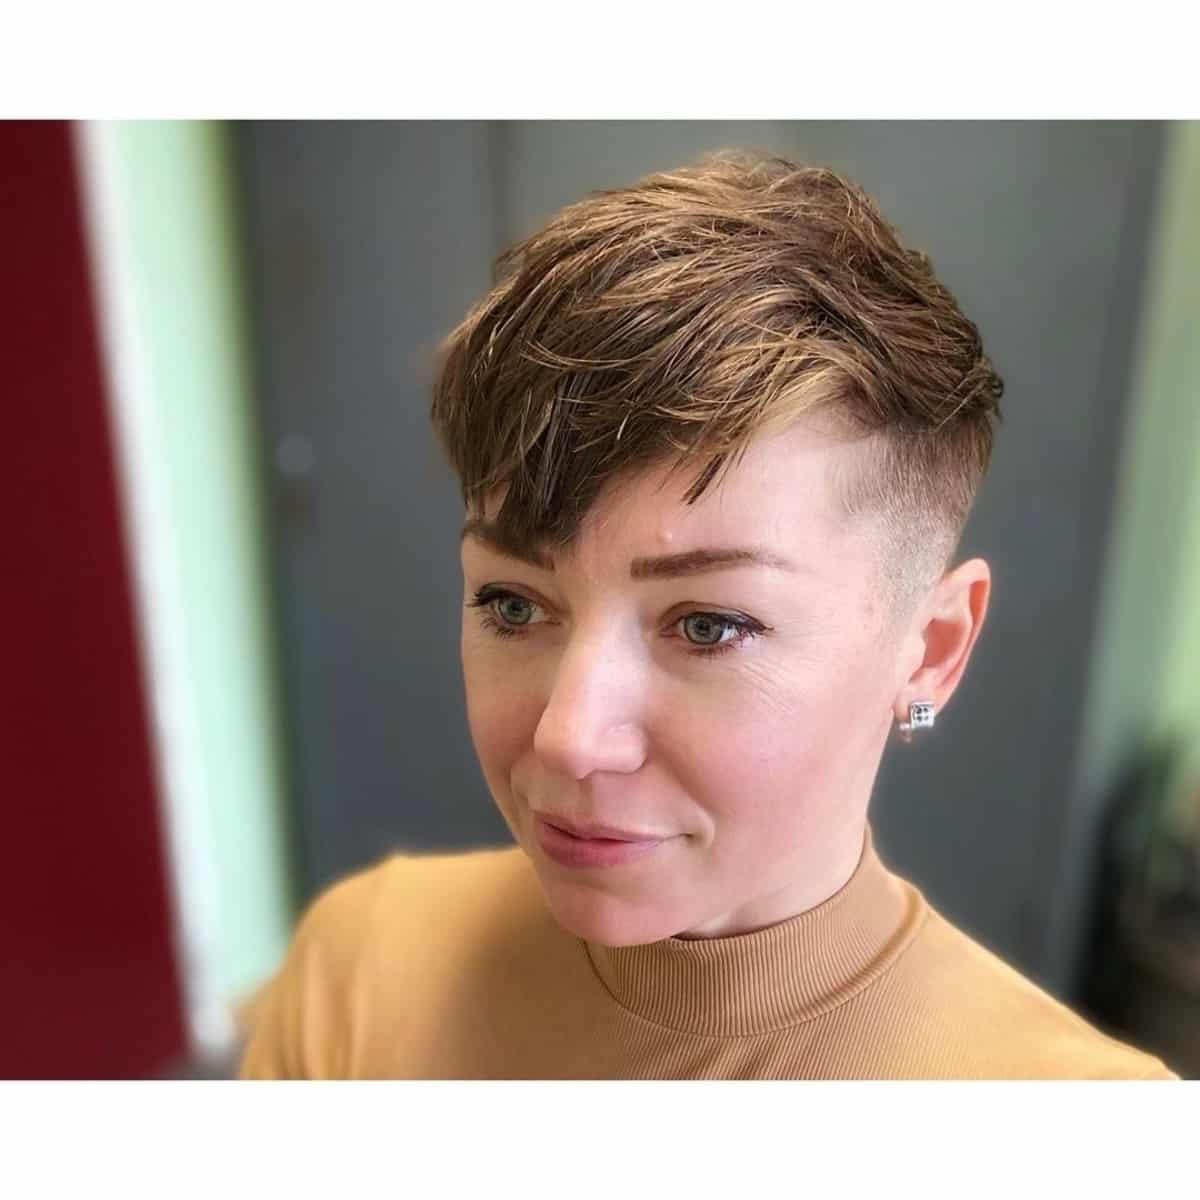 Tapered pixie cut with a textured top